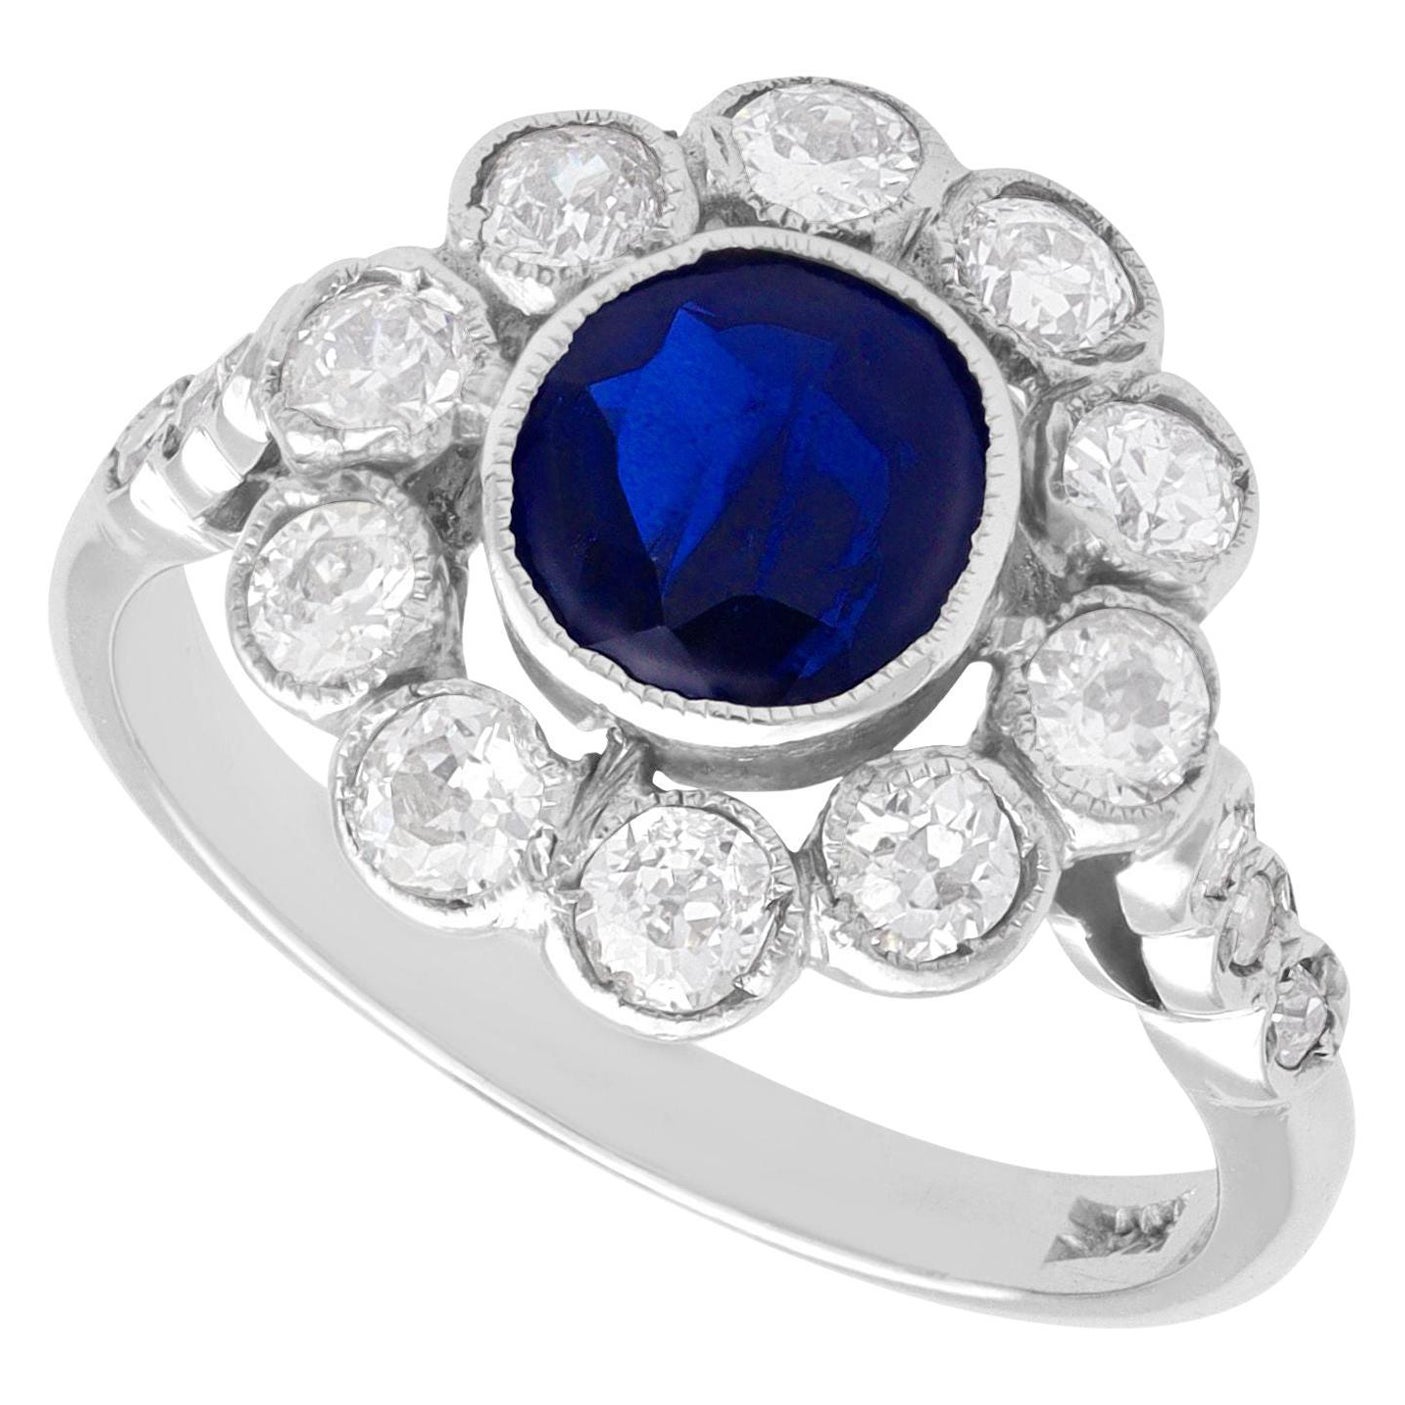 Antique 1.28 Carat Sapphire and 1.20 Carat Diamond White Gold Cluster Ring